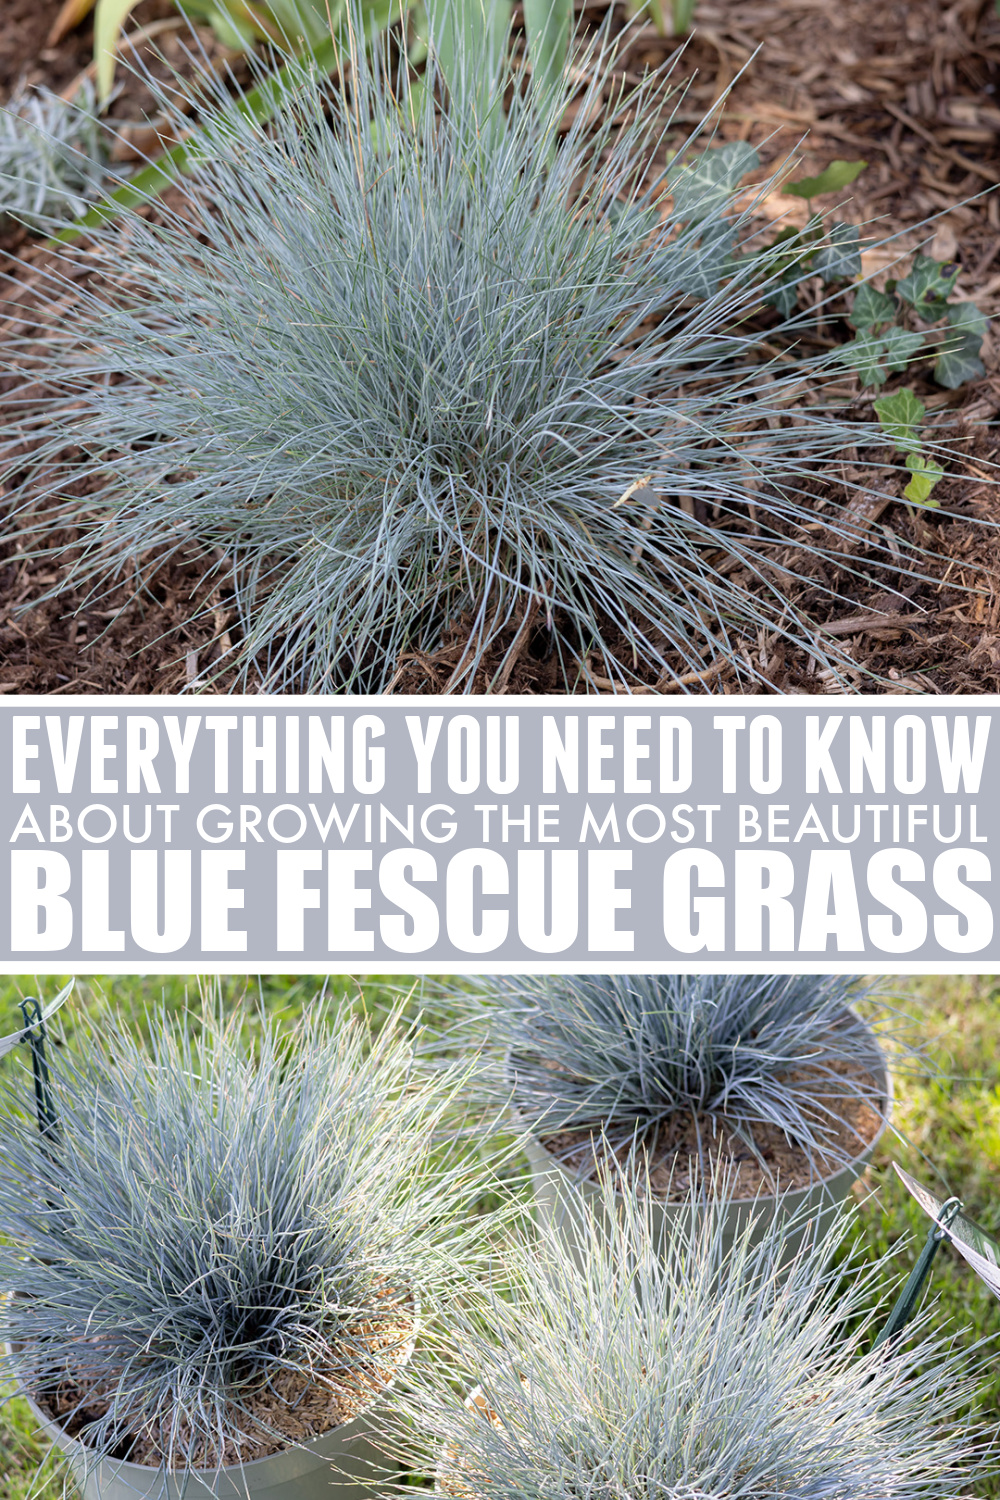 Pinterest graphic for growing blue fescue grass